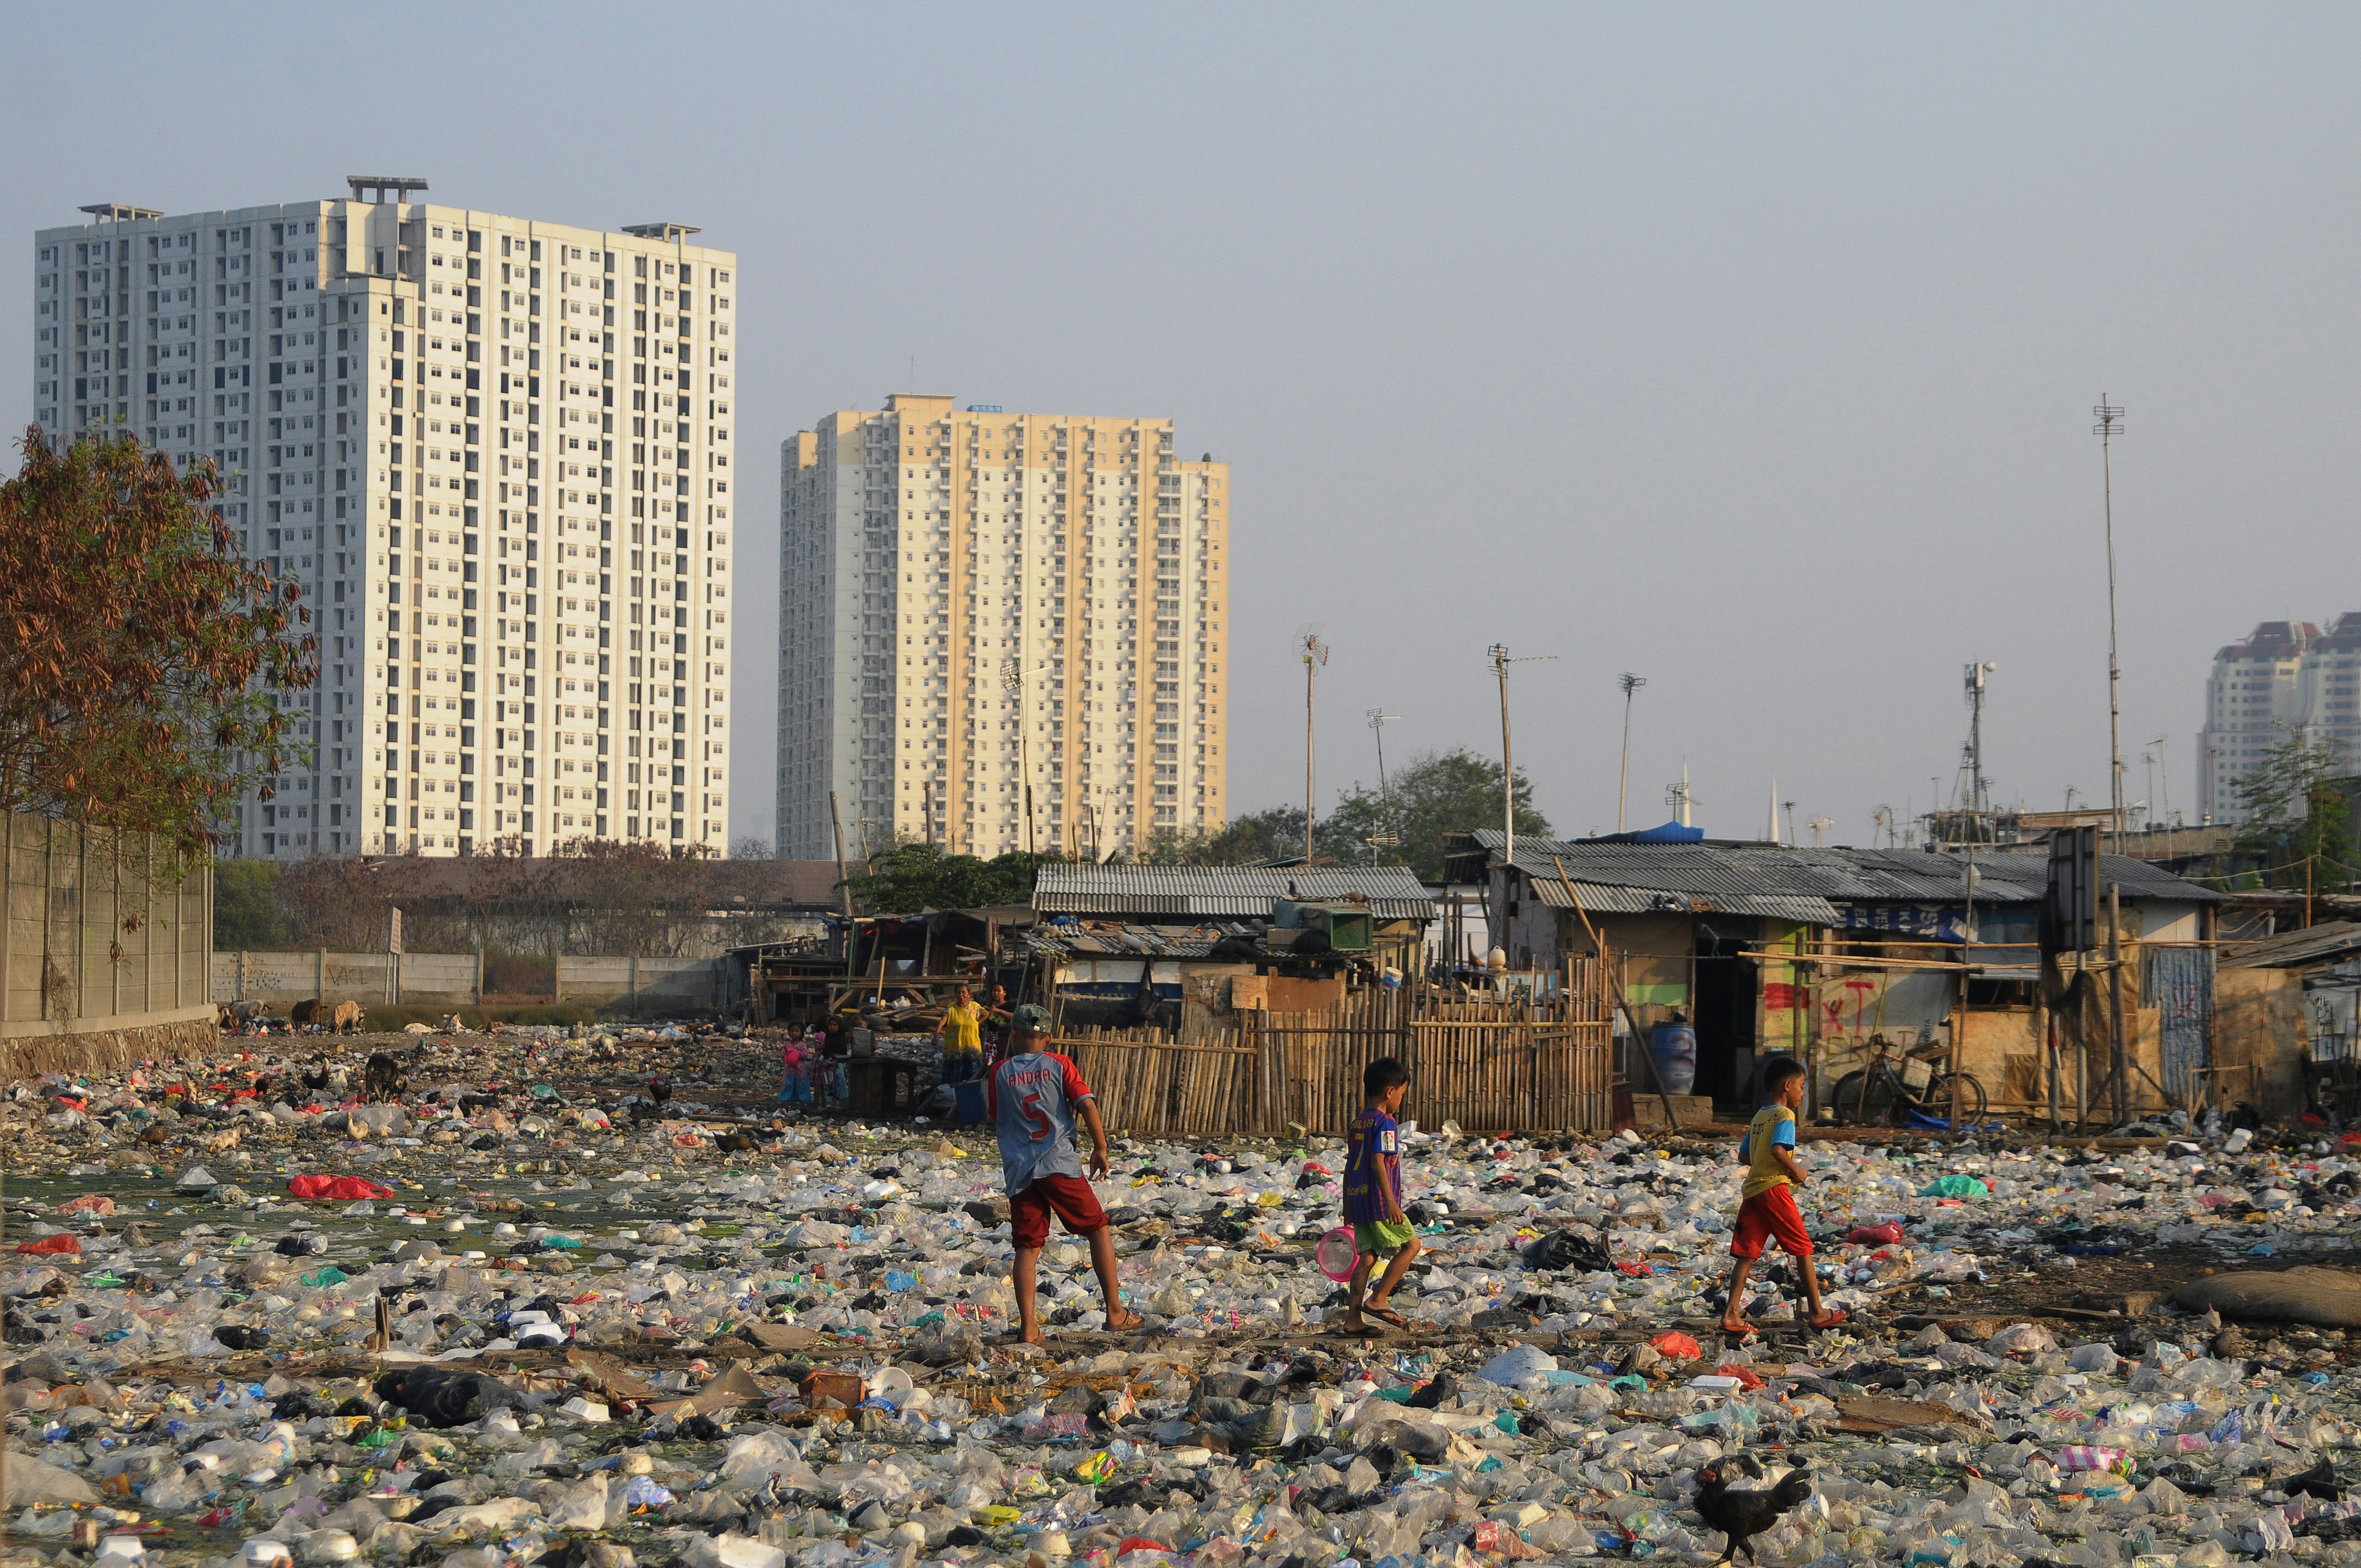 Plastic waste and pollution is spread across a large open space on the poorer outskirts of Jakarta. In the background two high-rise buildings are visible.